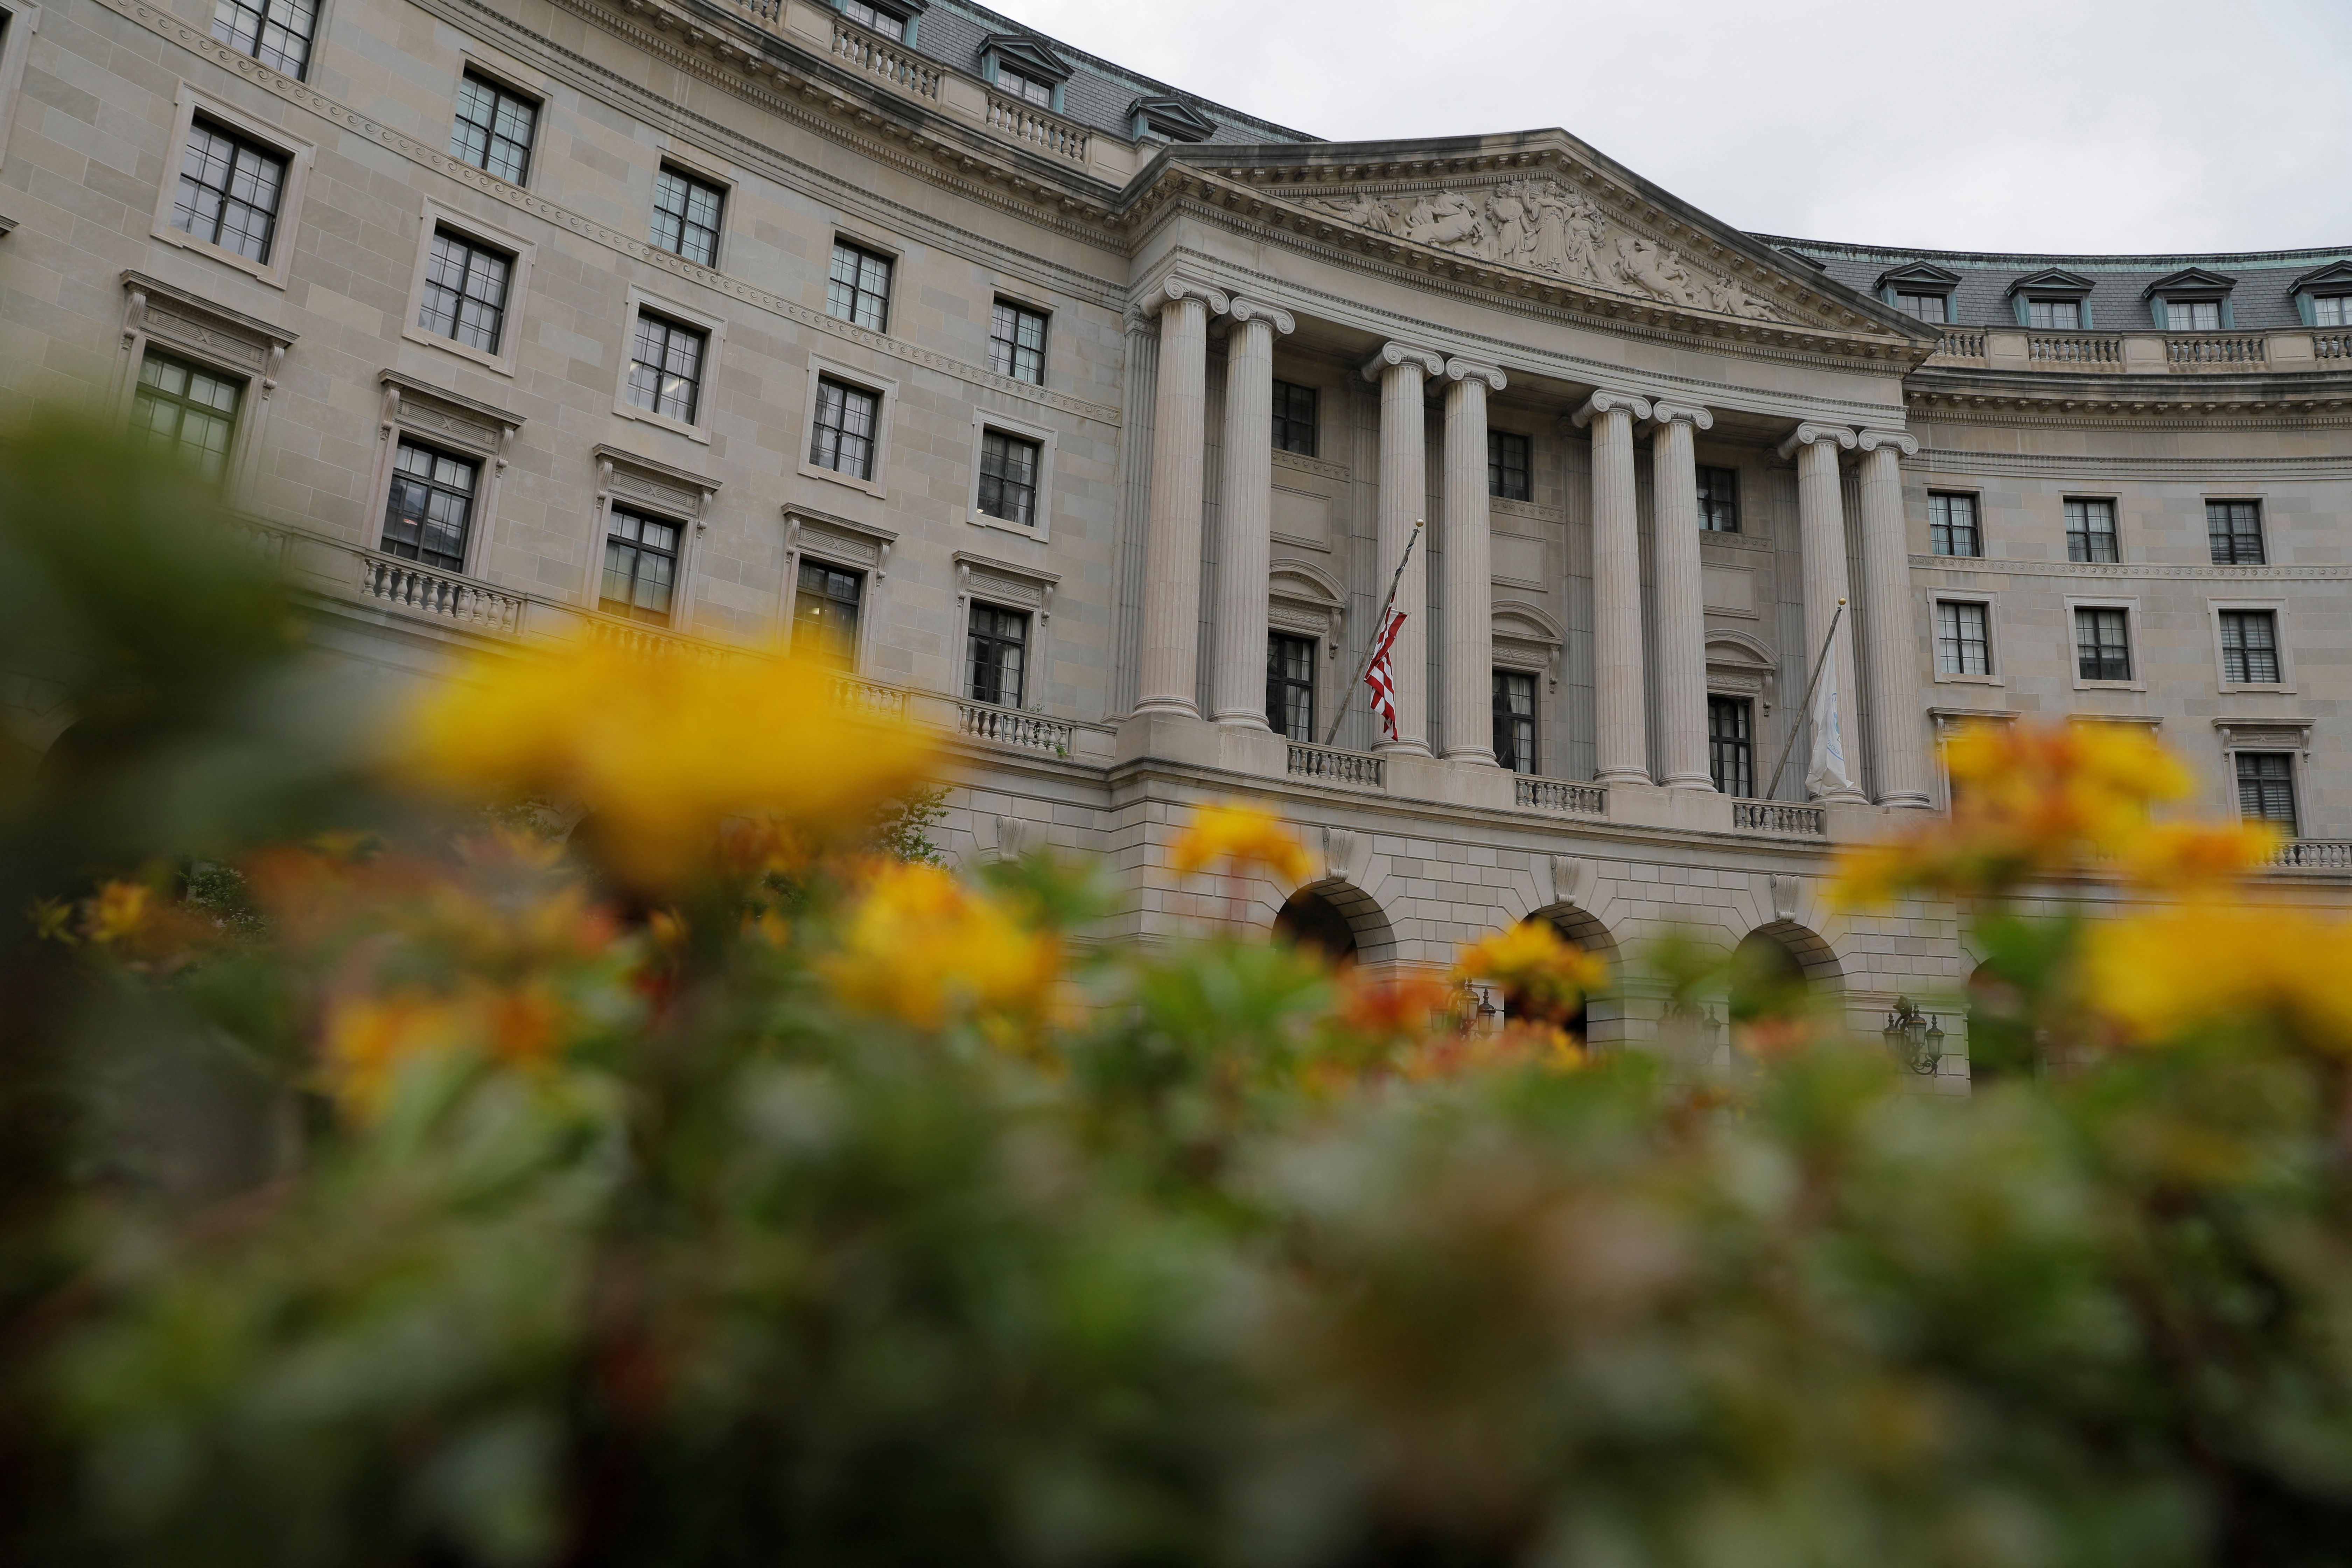 Flowers are seen in front of the headquarters of the United States Environmental Protection Agency (EPA) in Washington, D.C.